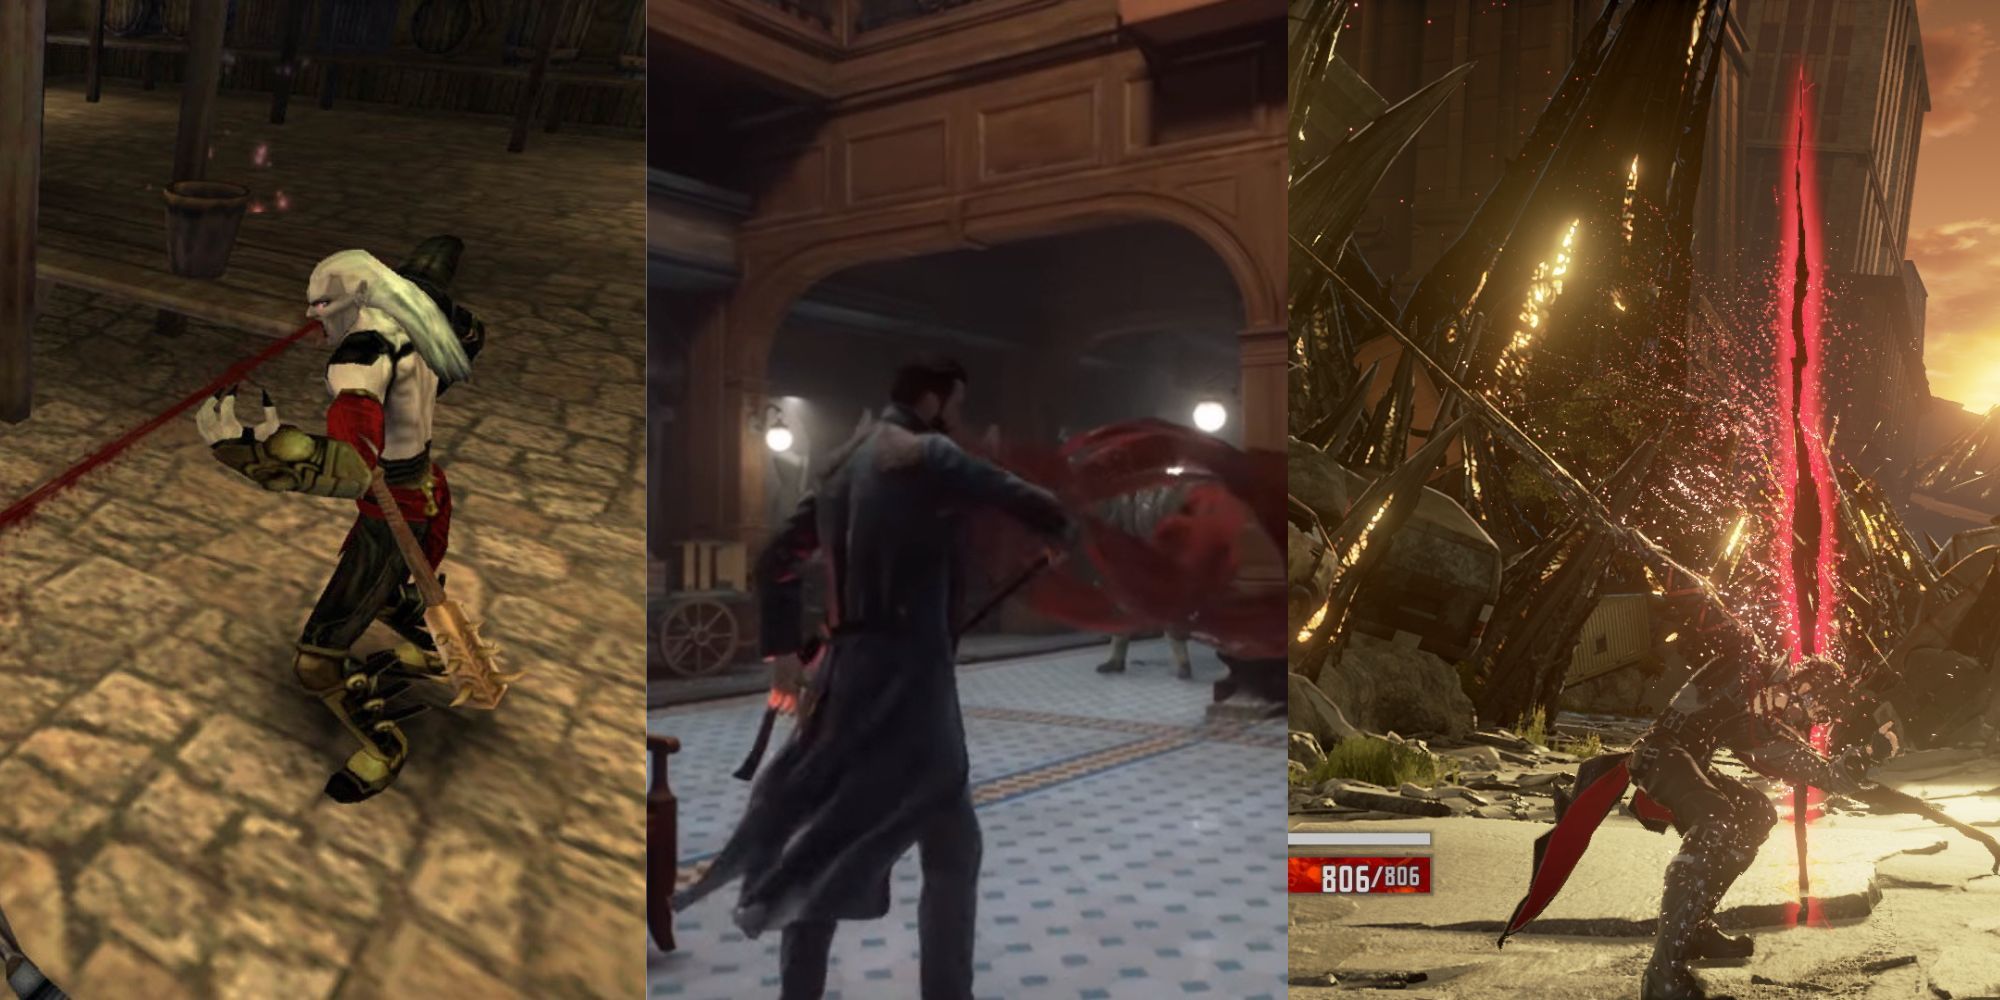 Kain drinking a stream of blood with his hand up, Main character of Vampyr uses blood as a weapon, Main character in code vein uses their sword in front of a rift of a destroyed city.